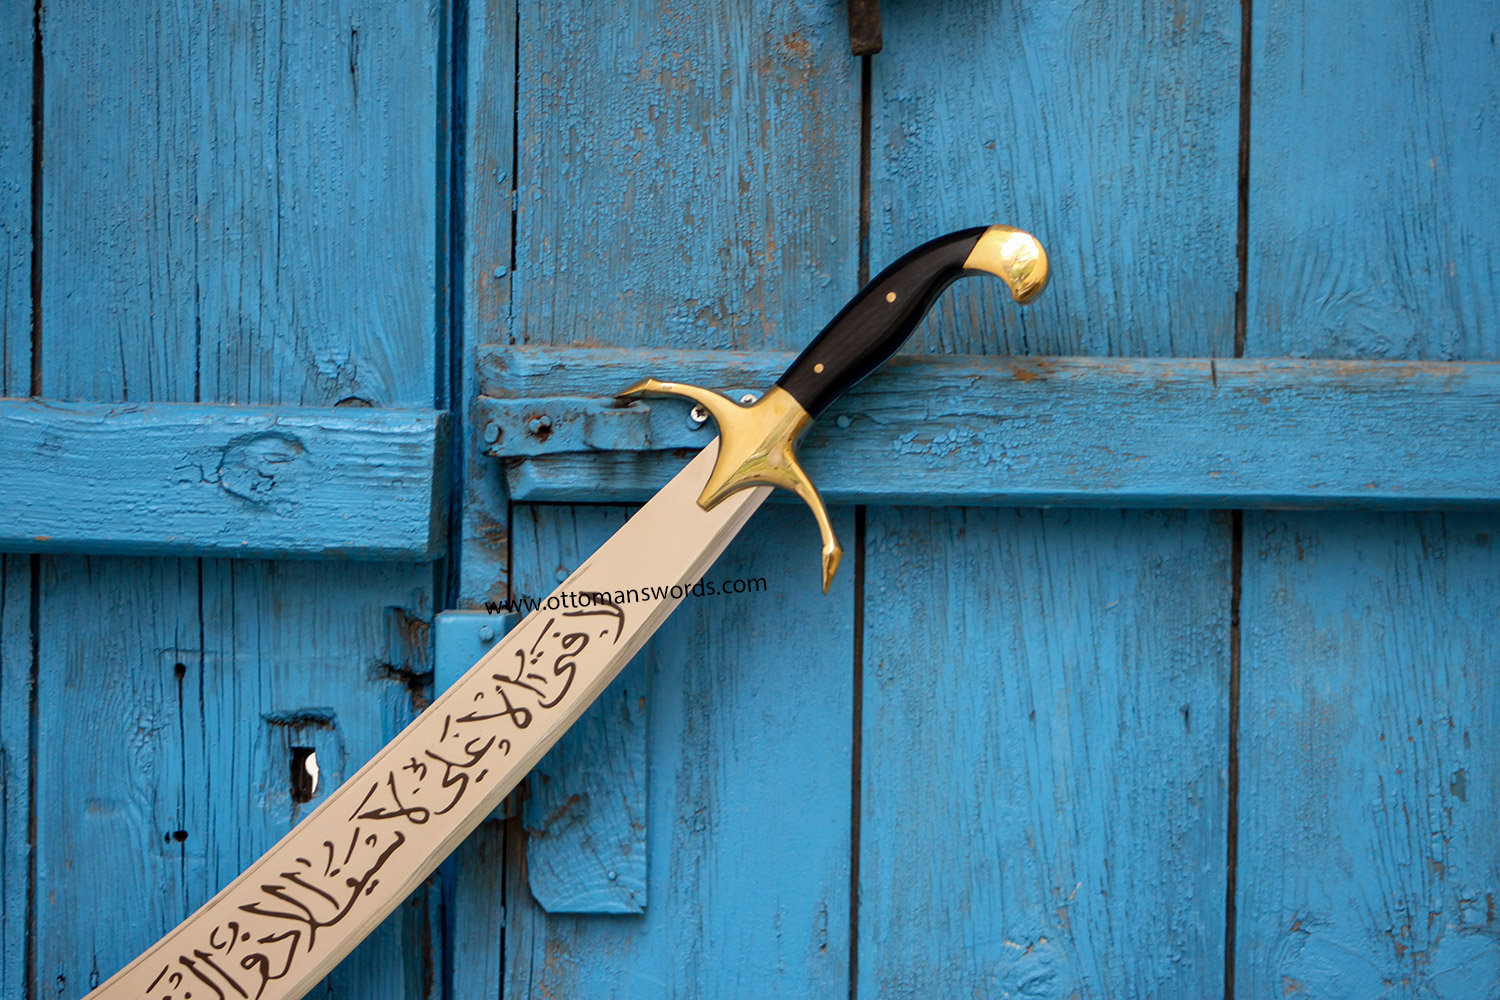  An image of an Islamic sword from the 10th century with a curved blade and a gold hilt, resting on a blue wooden door.